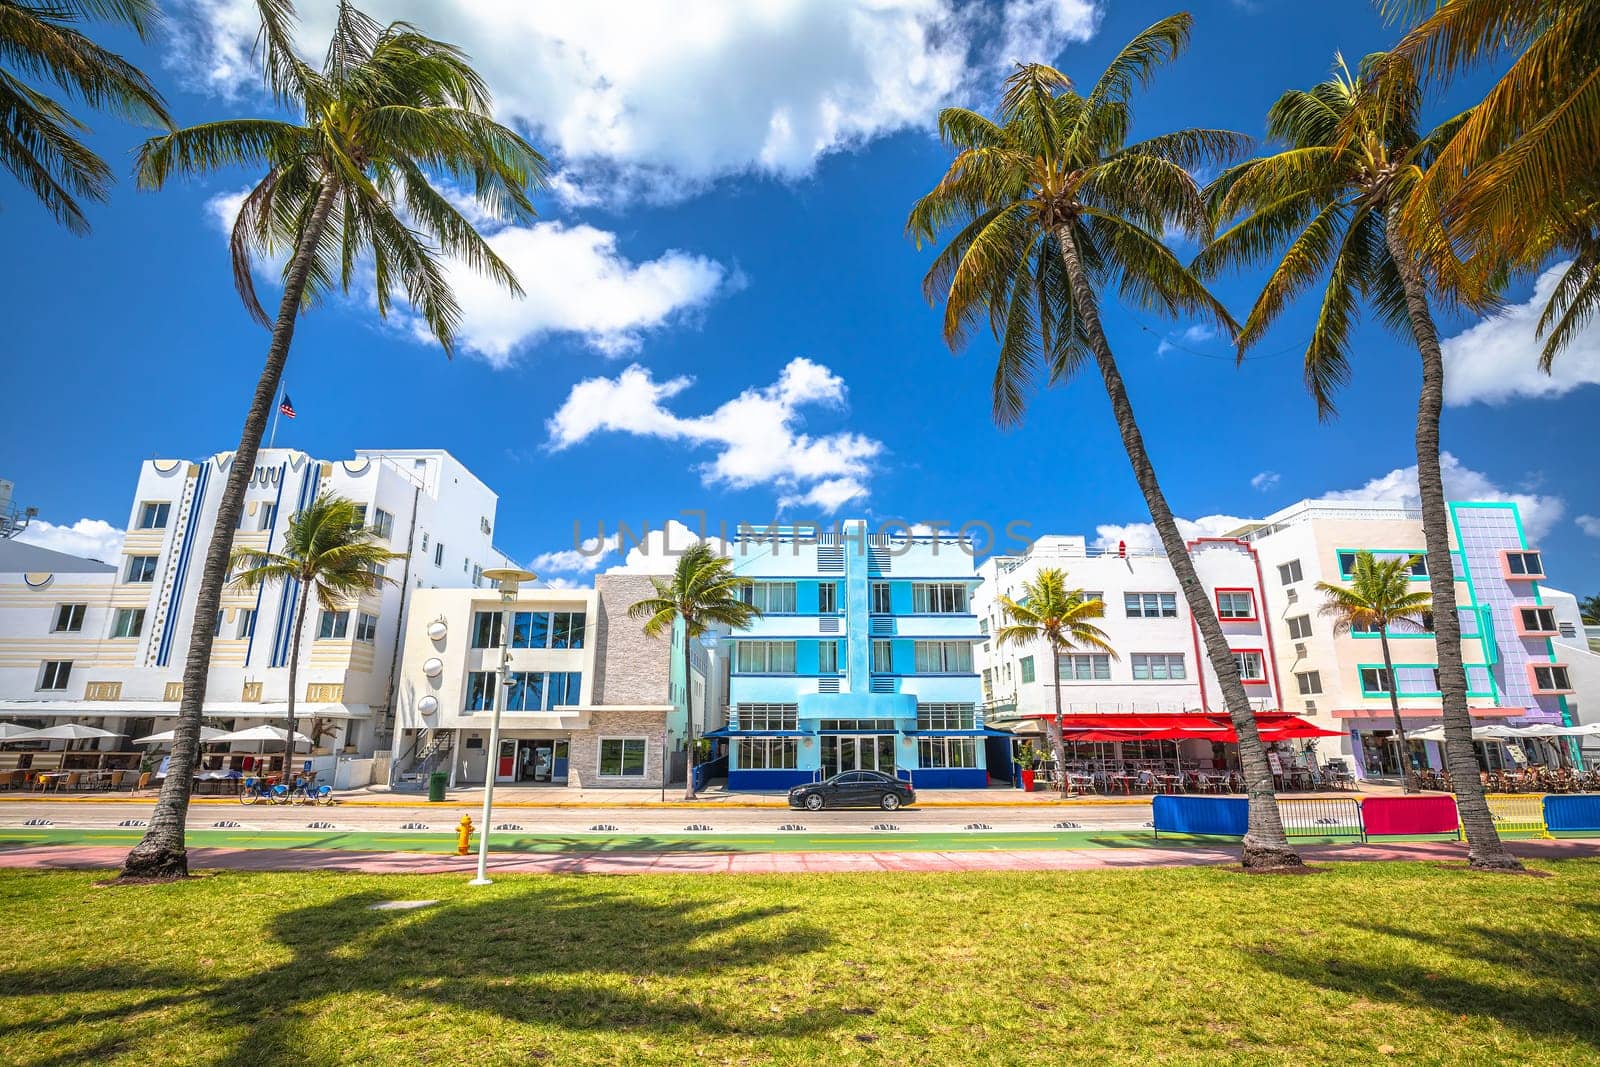 Miami South Beach Ocean Drive colorful Art Deco street architecture view by xbrchx